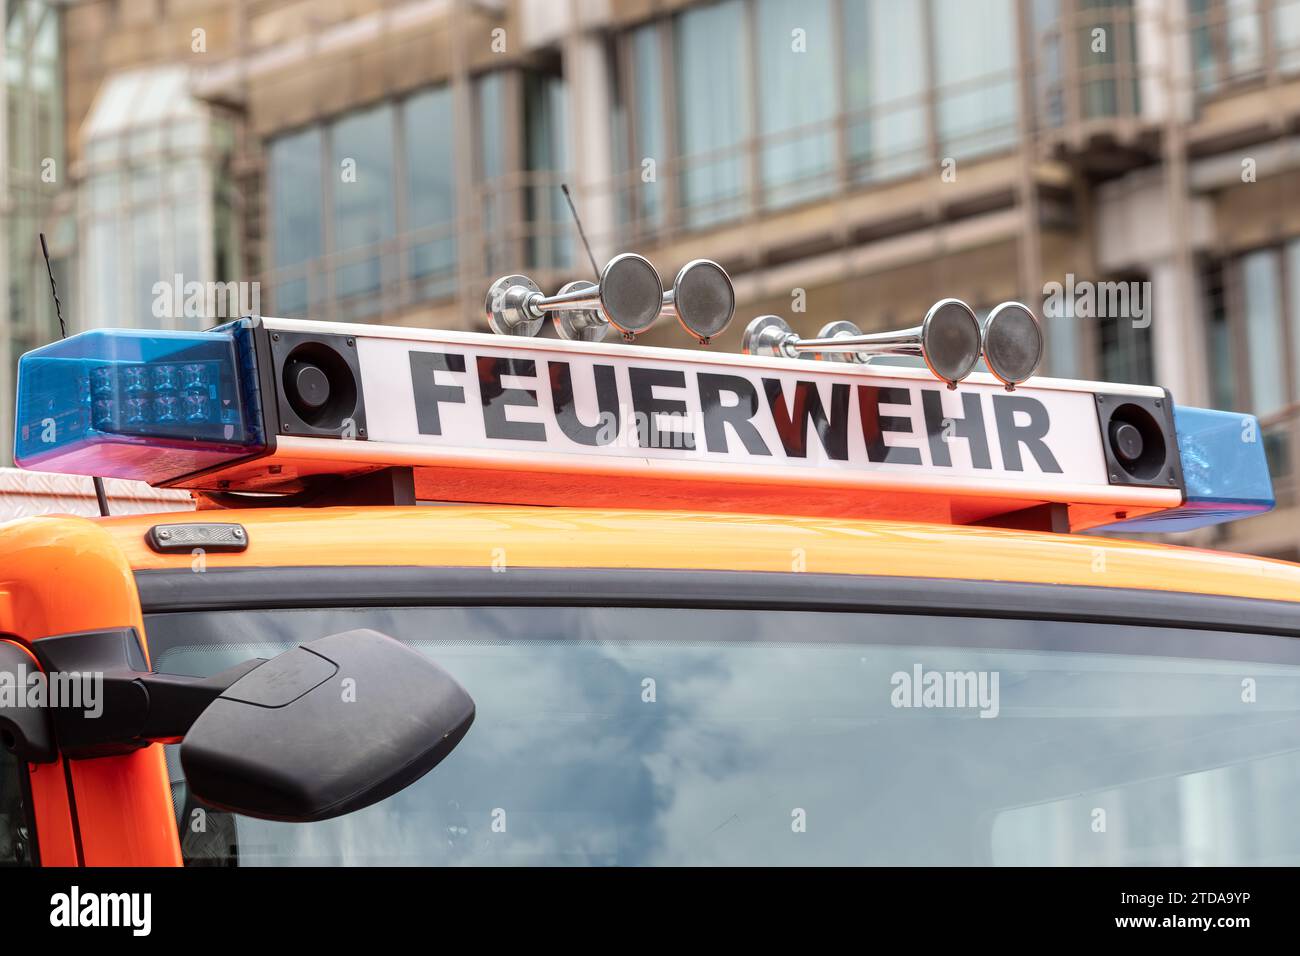 German Fire Truck with Feuerwehr Sign and Emergency Lights: First Responder and Public Safety Equipment Stock Photo